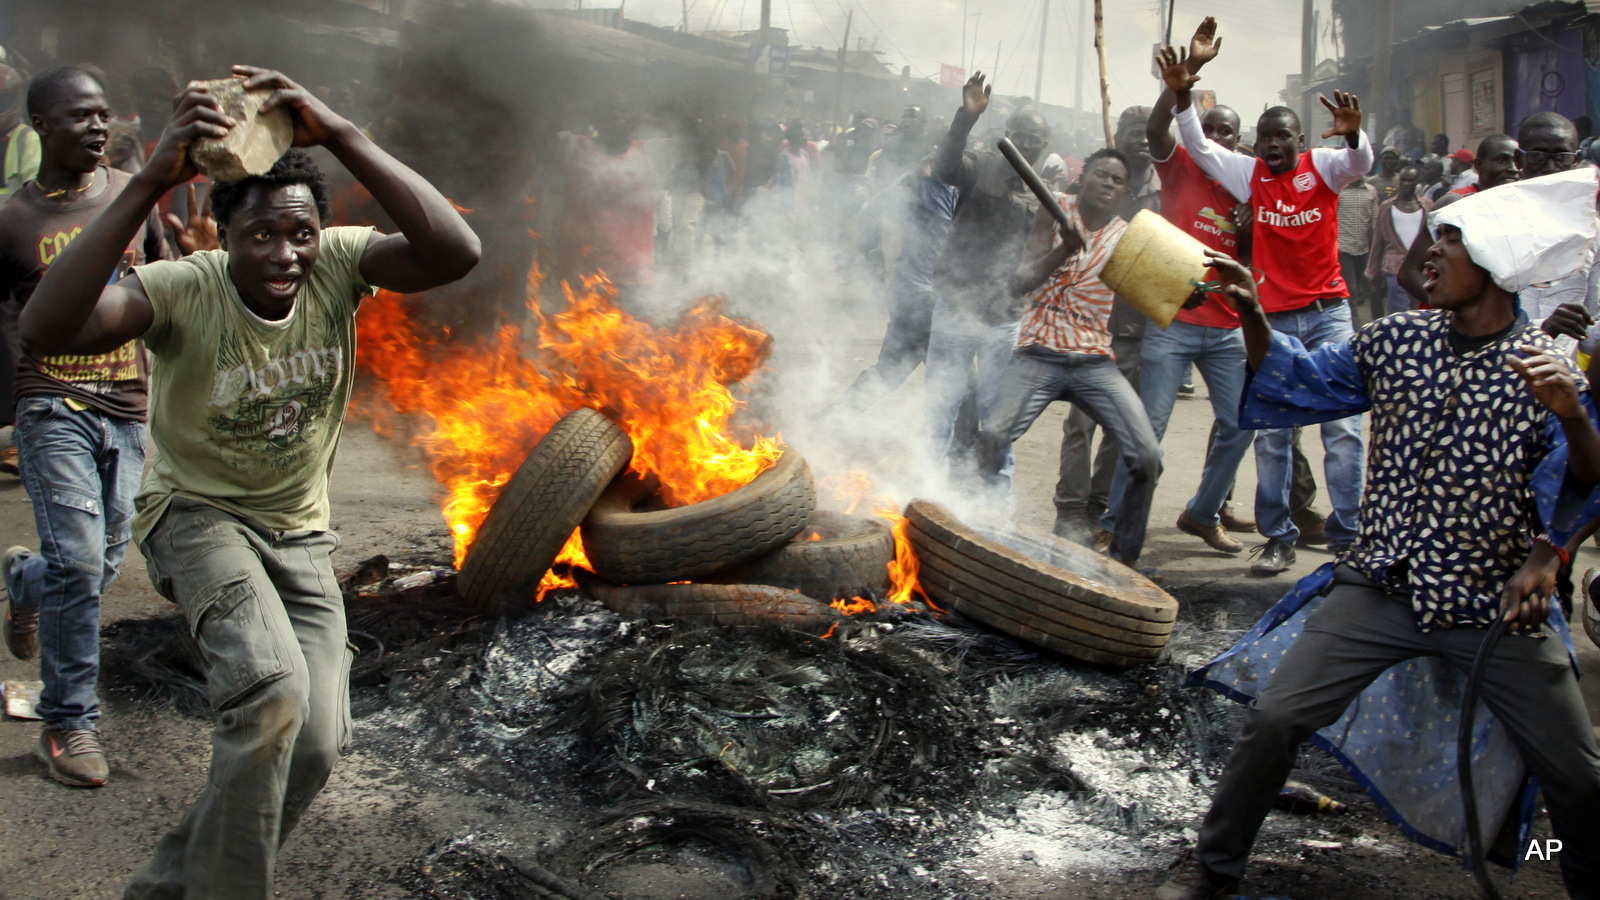 Opposition supporters stand by burning barricades set up in protest over a pro-government MP whom they allege made offensive remarks about the opposition leader, in the Kibera slum of Nairobi, Kenya Tuesday, June 14, 2016. The protesters then threw rocks and engaged in running battles with police who fired teargas and chased them through the streets and alleys. (AP Photo/Khalil Senosi)